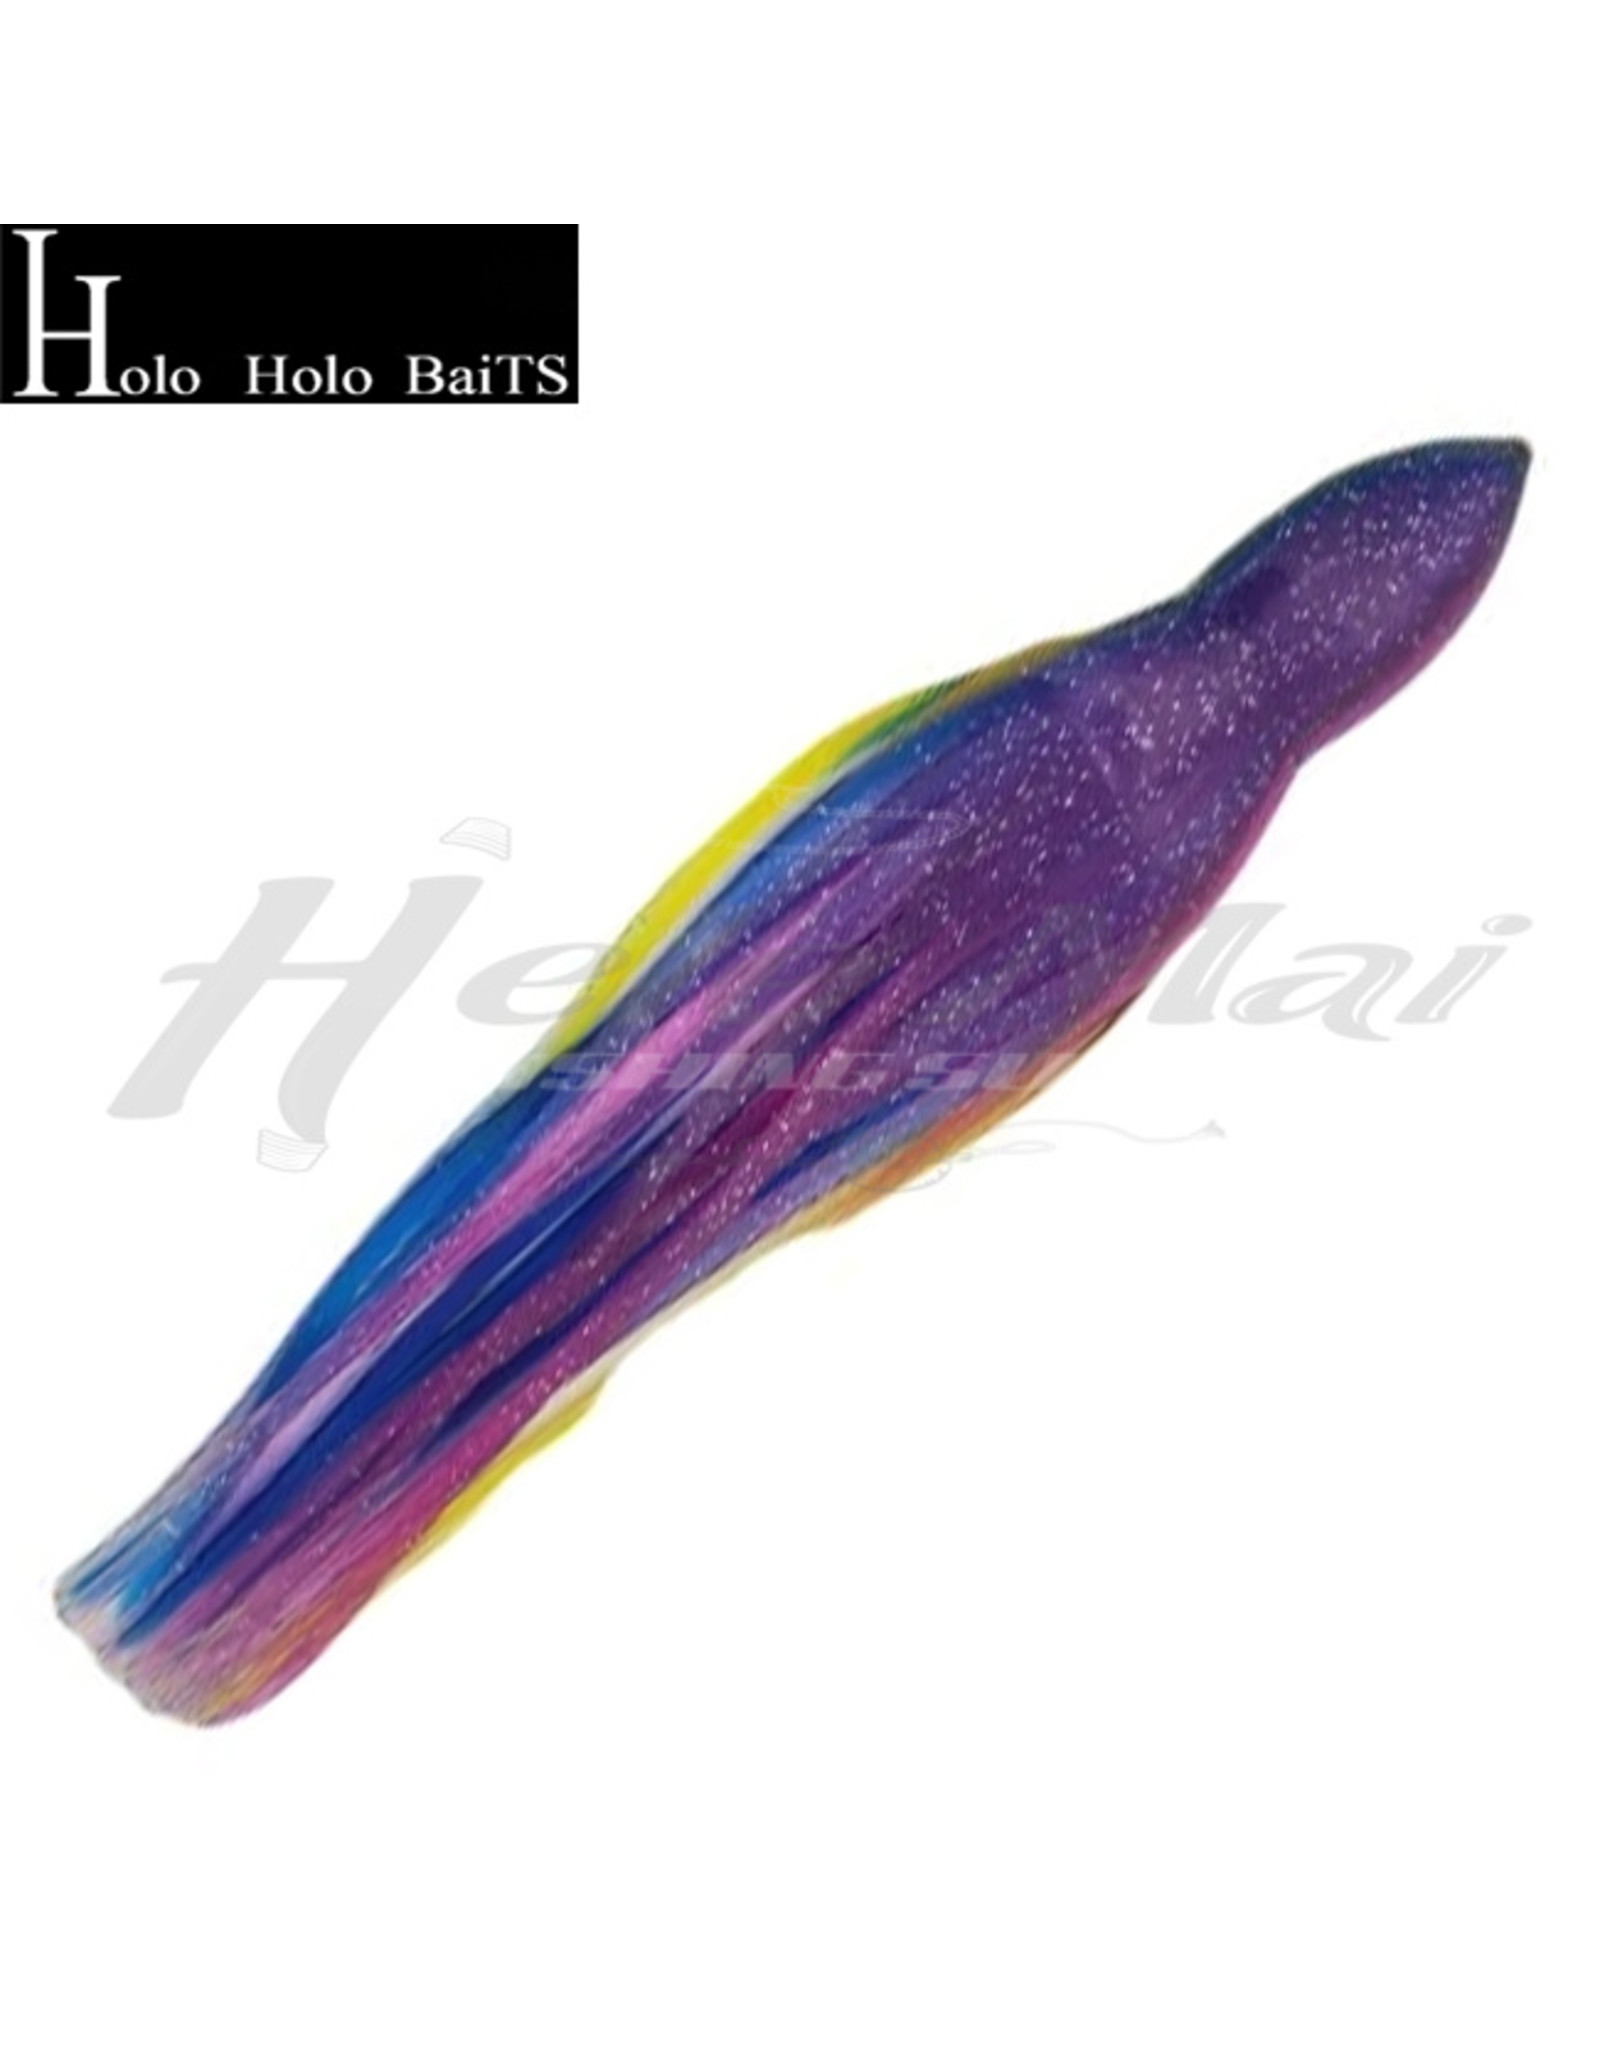 HOLO HOLO (HH) HH, 7" SQUID SKIRT BLUE PURPLE YELLOW 0636